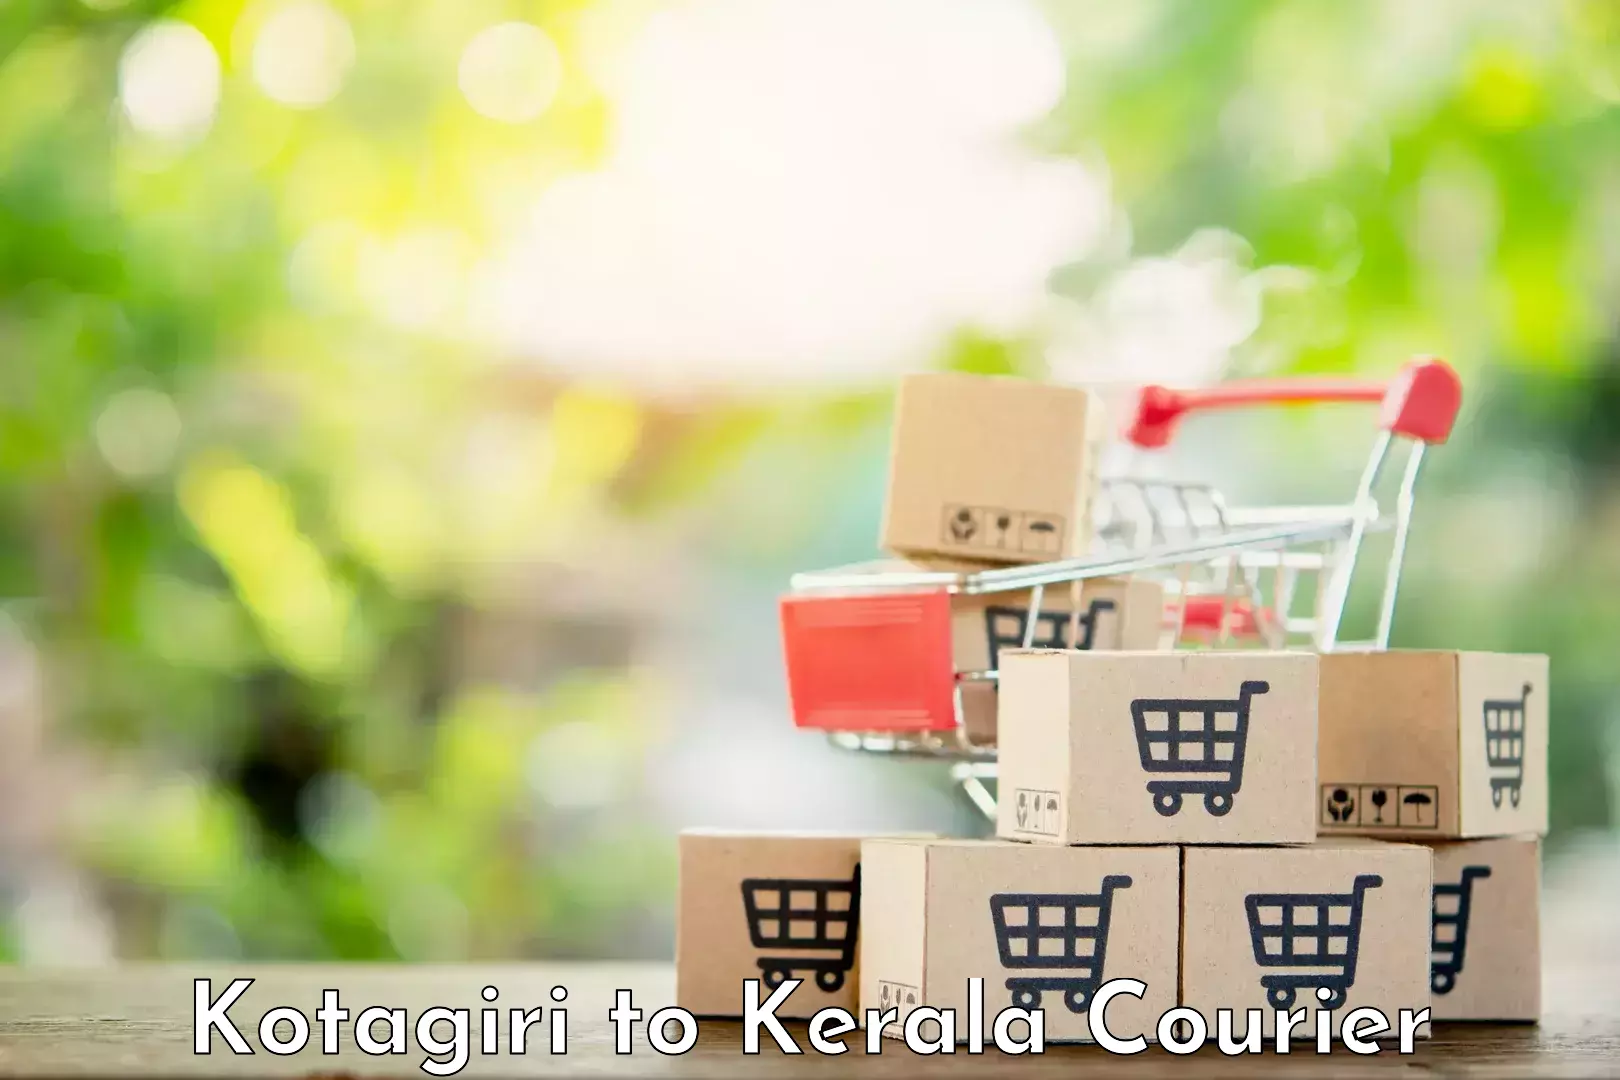 Courier service booking Kotagiri to Rajamudy